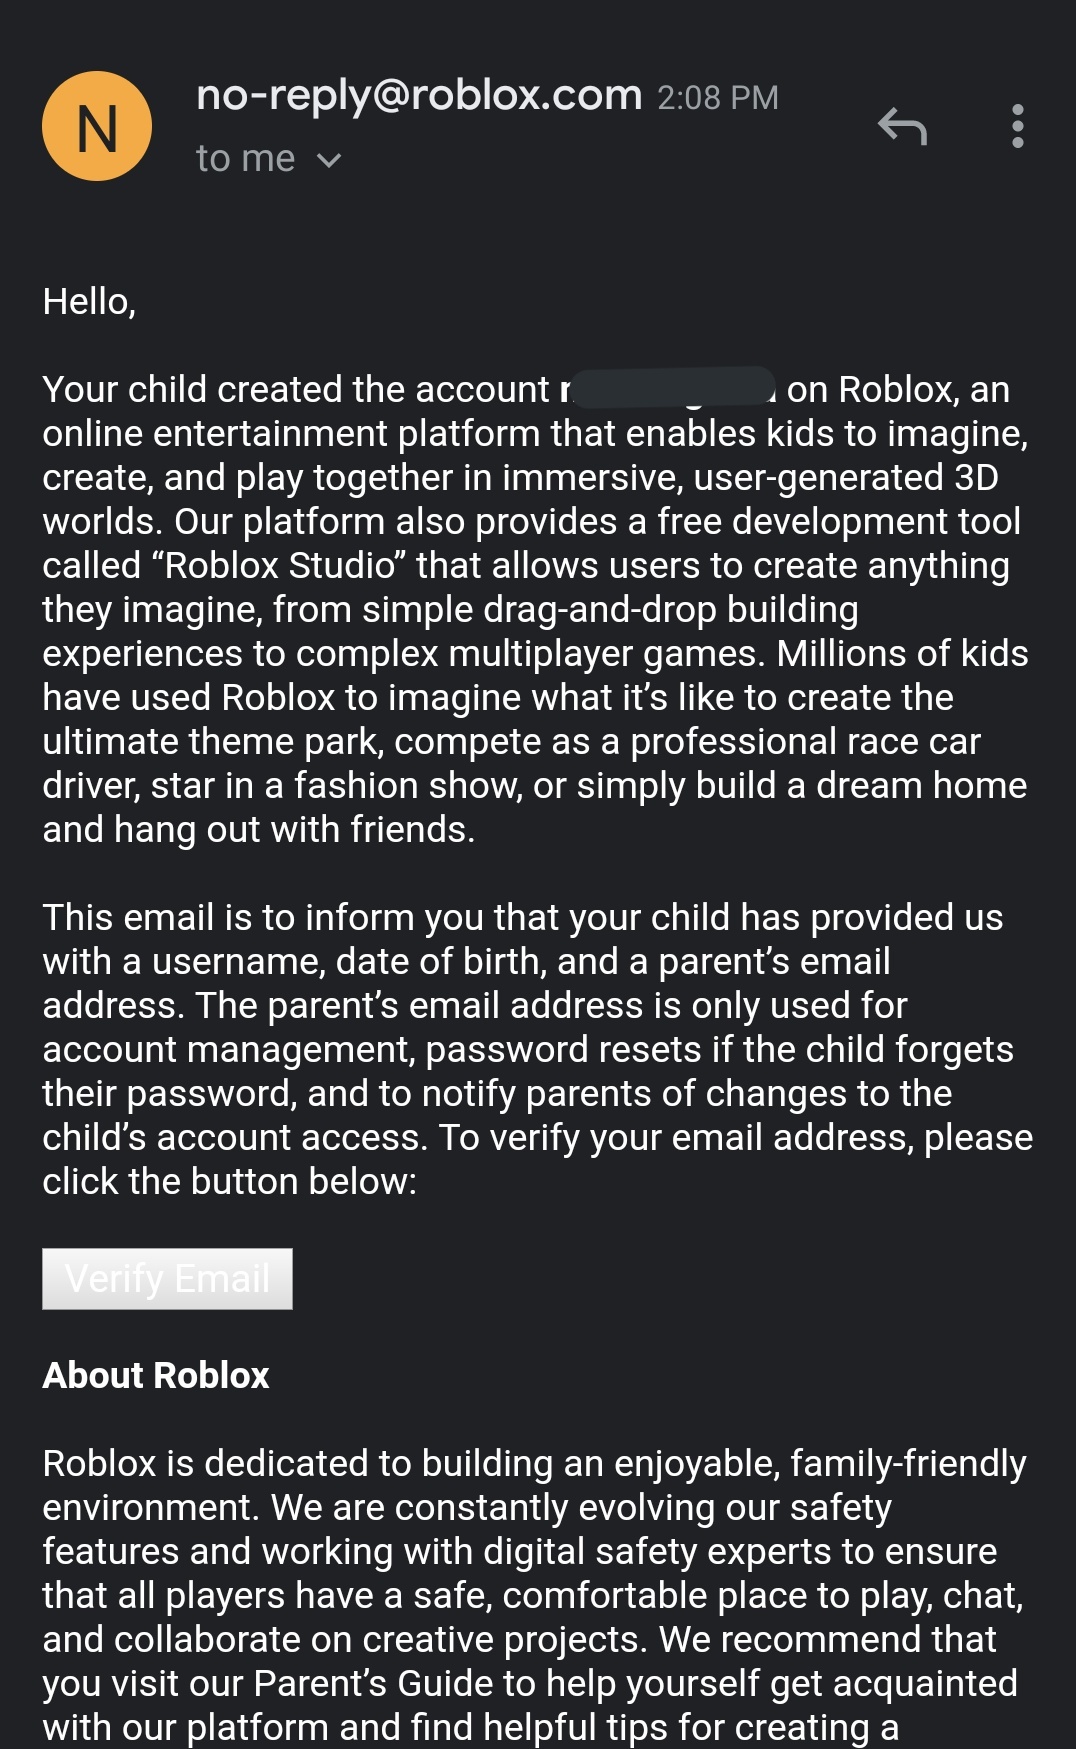 Mikehaze On Twitter I Get This Msg Everyday From Roblox About A Child Who Needs Me To Verify Their Account So They Can Play I Tried To Verify The Email But I - roblox help emai address